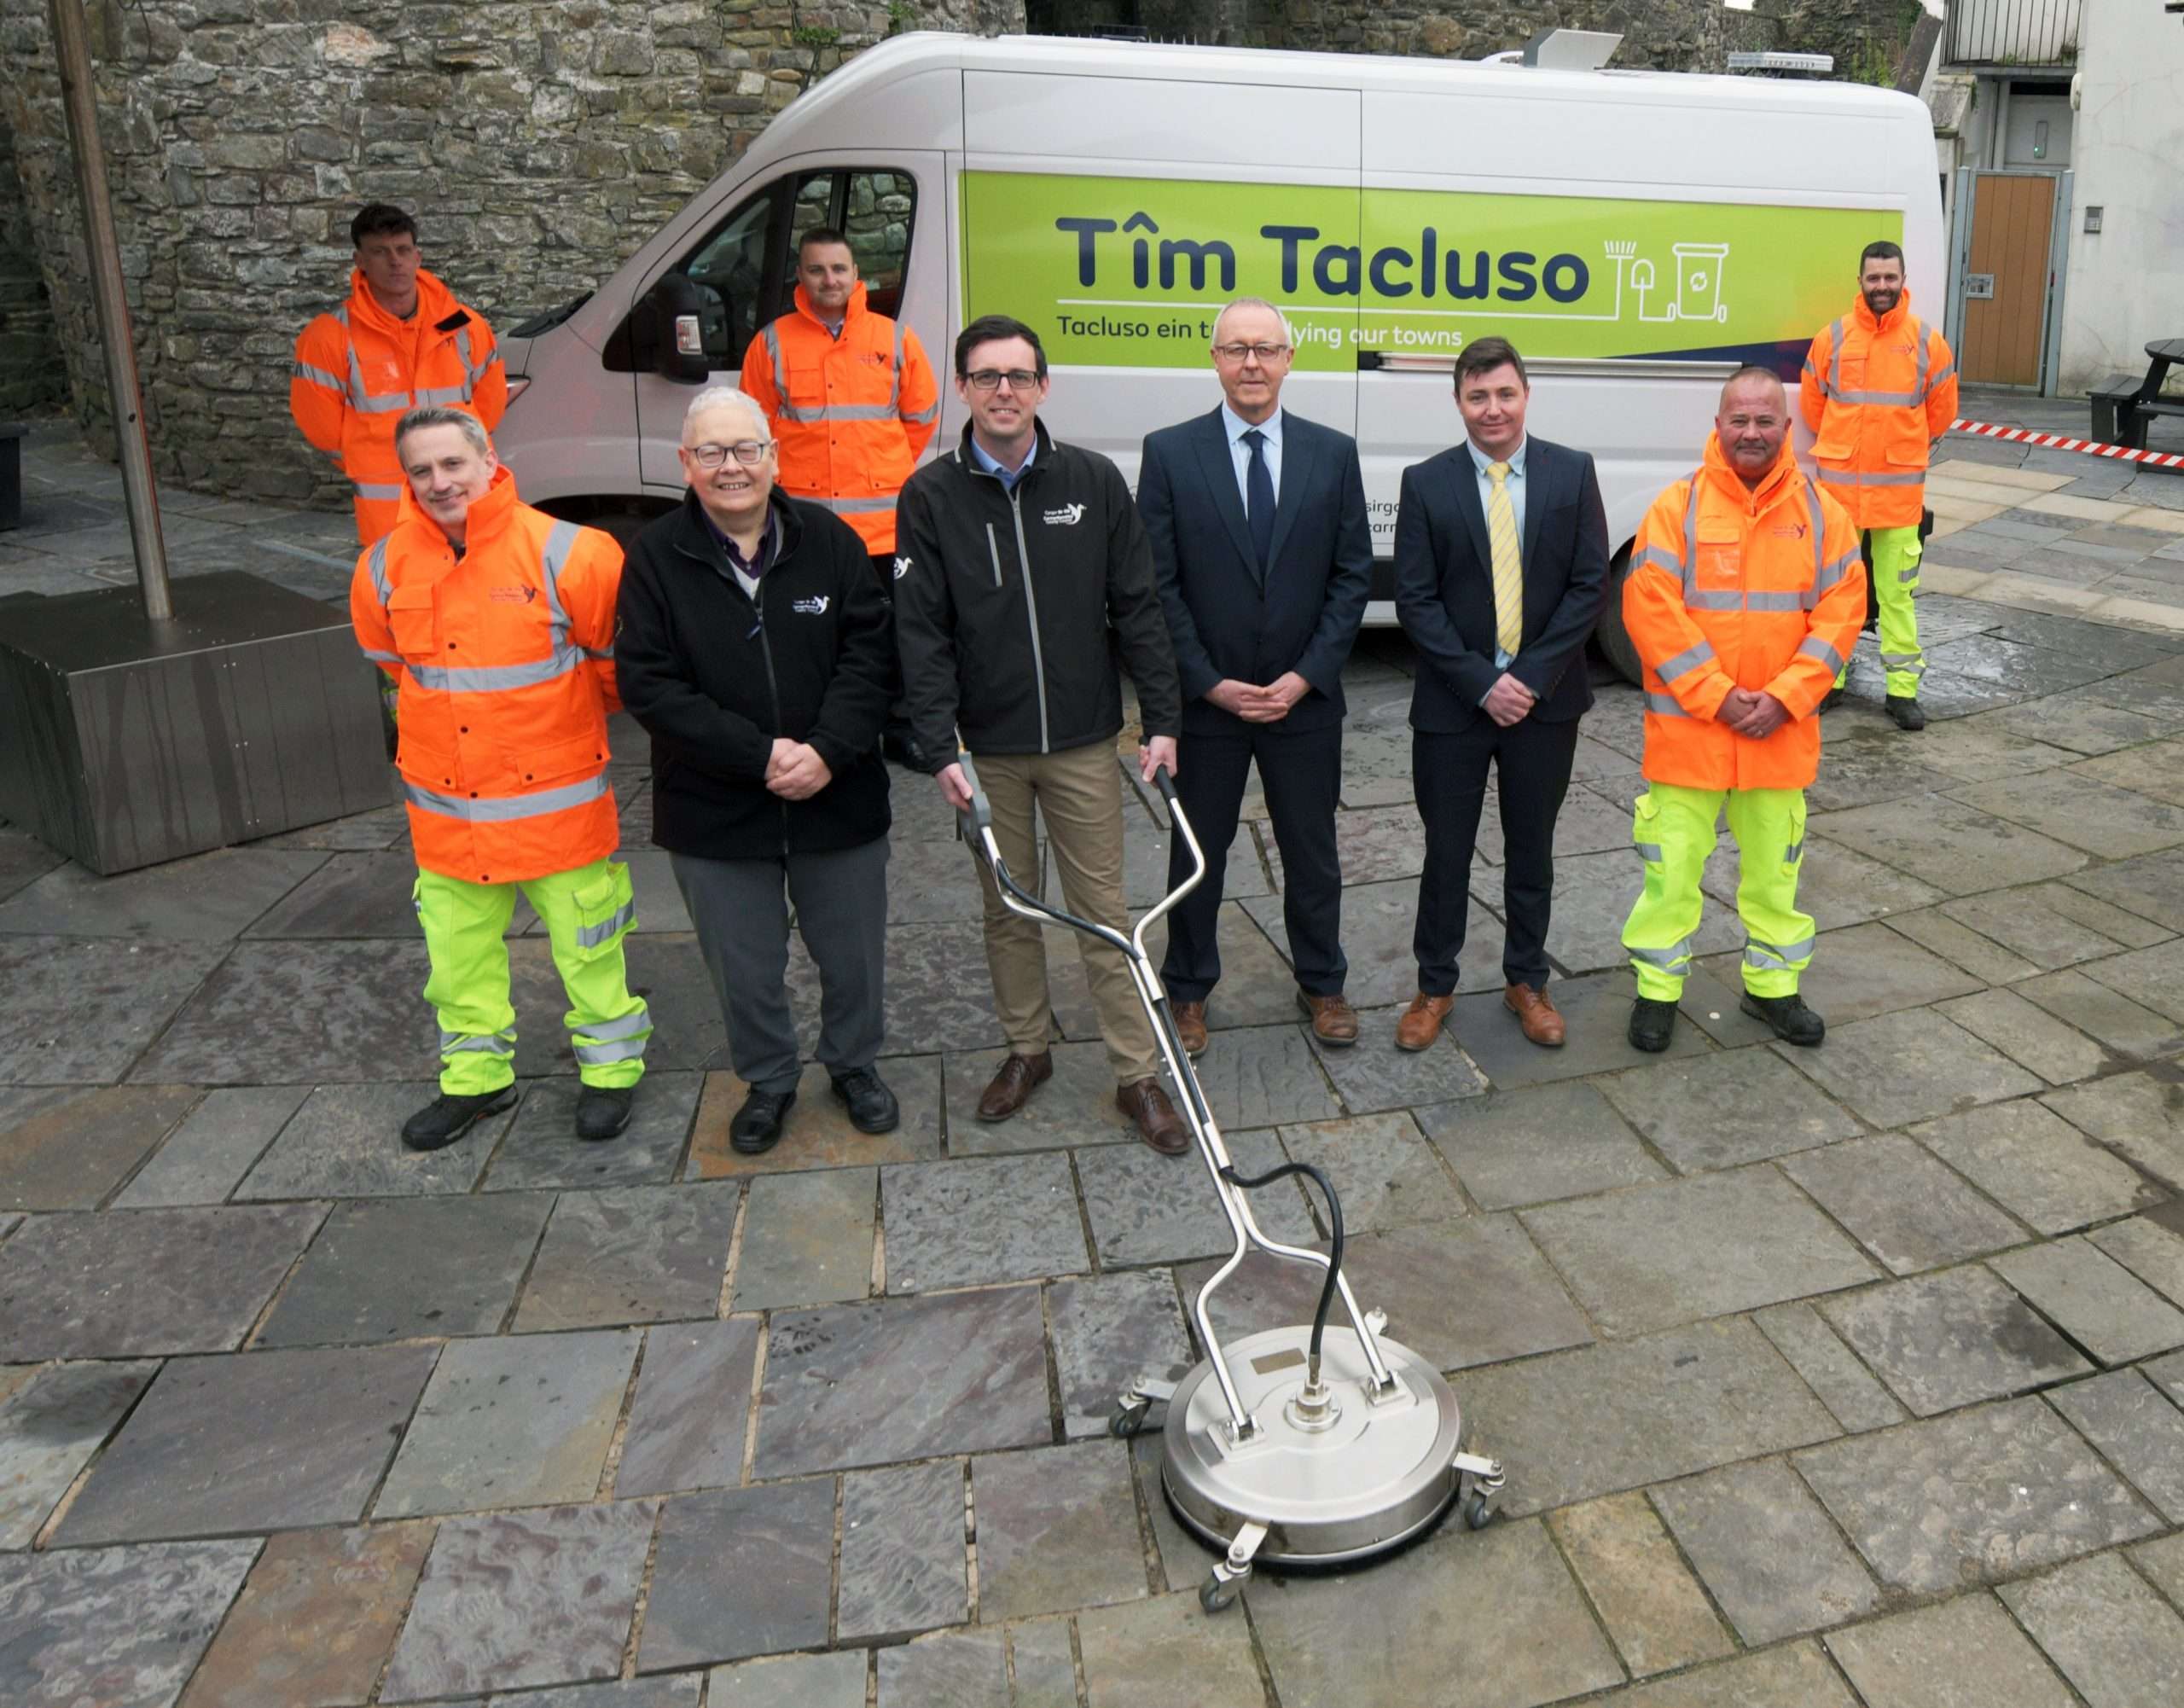 Carmarthenshire Council proudly announce ‘Tim Tacluso’ initiative aimed at enhancing town centres in the county